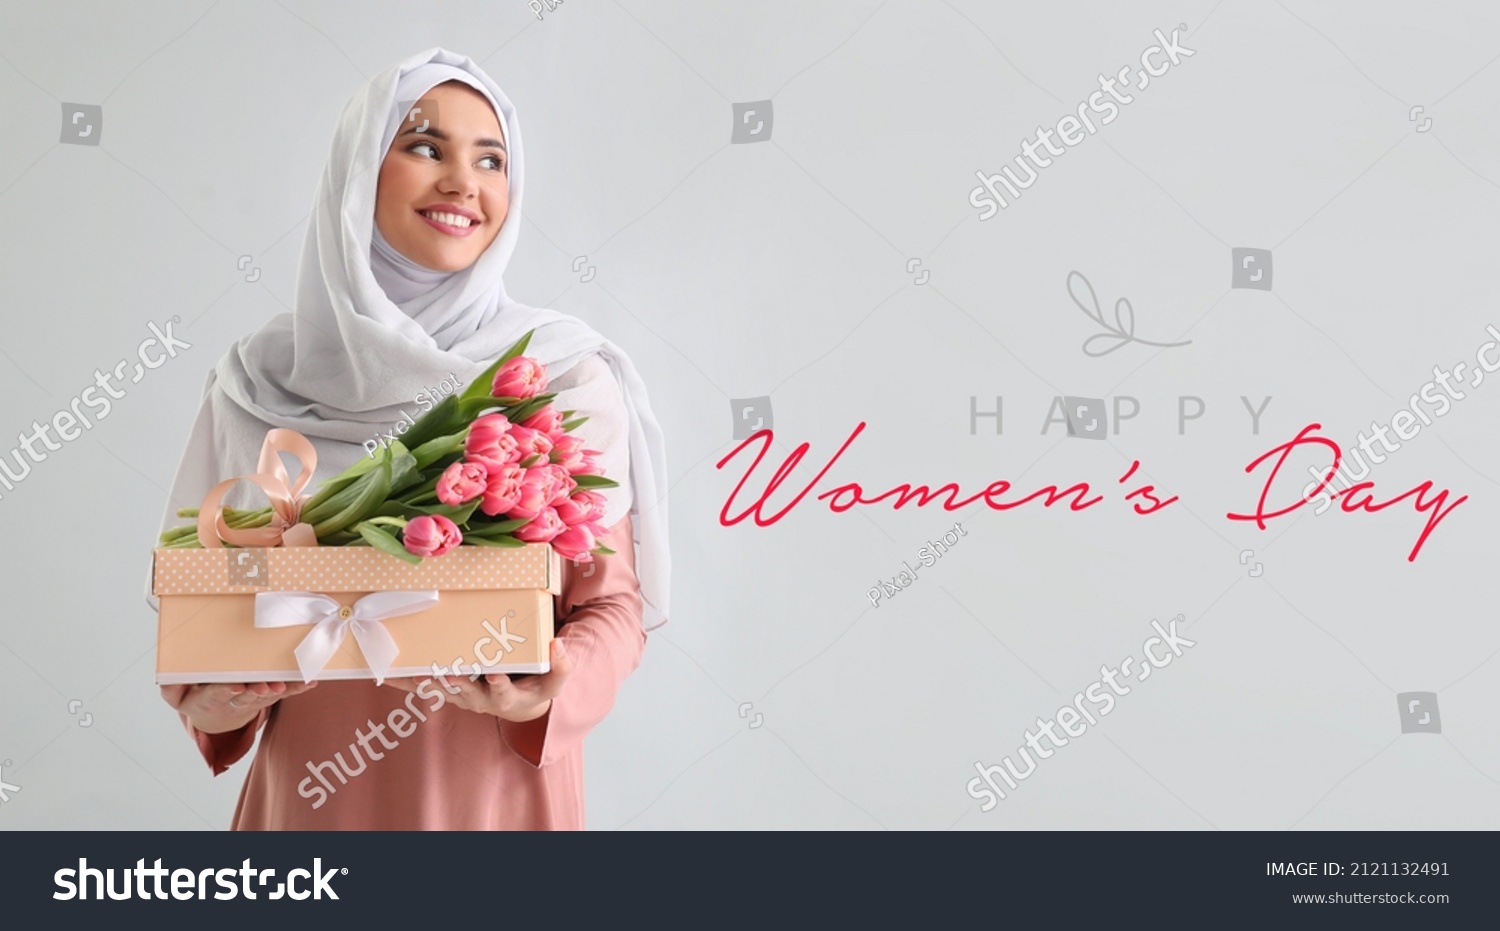 Beautiful greeting card for International Women's Day celebration with young Muslim woman holding gift #2121132491